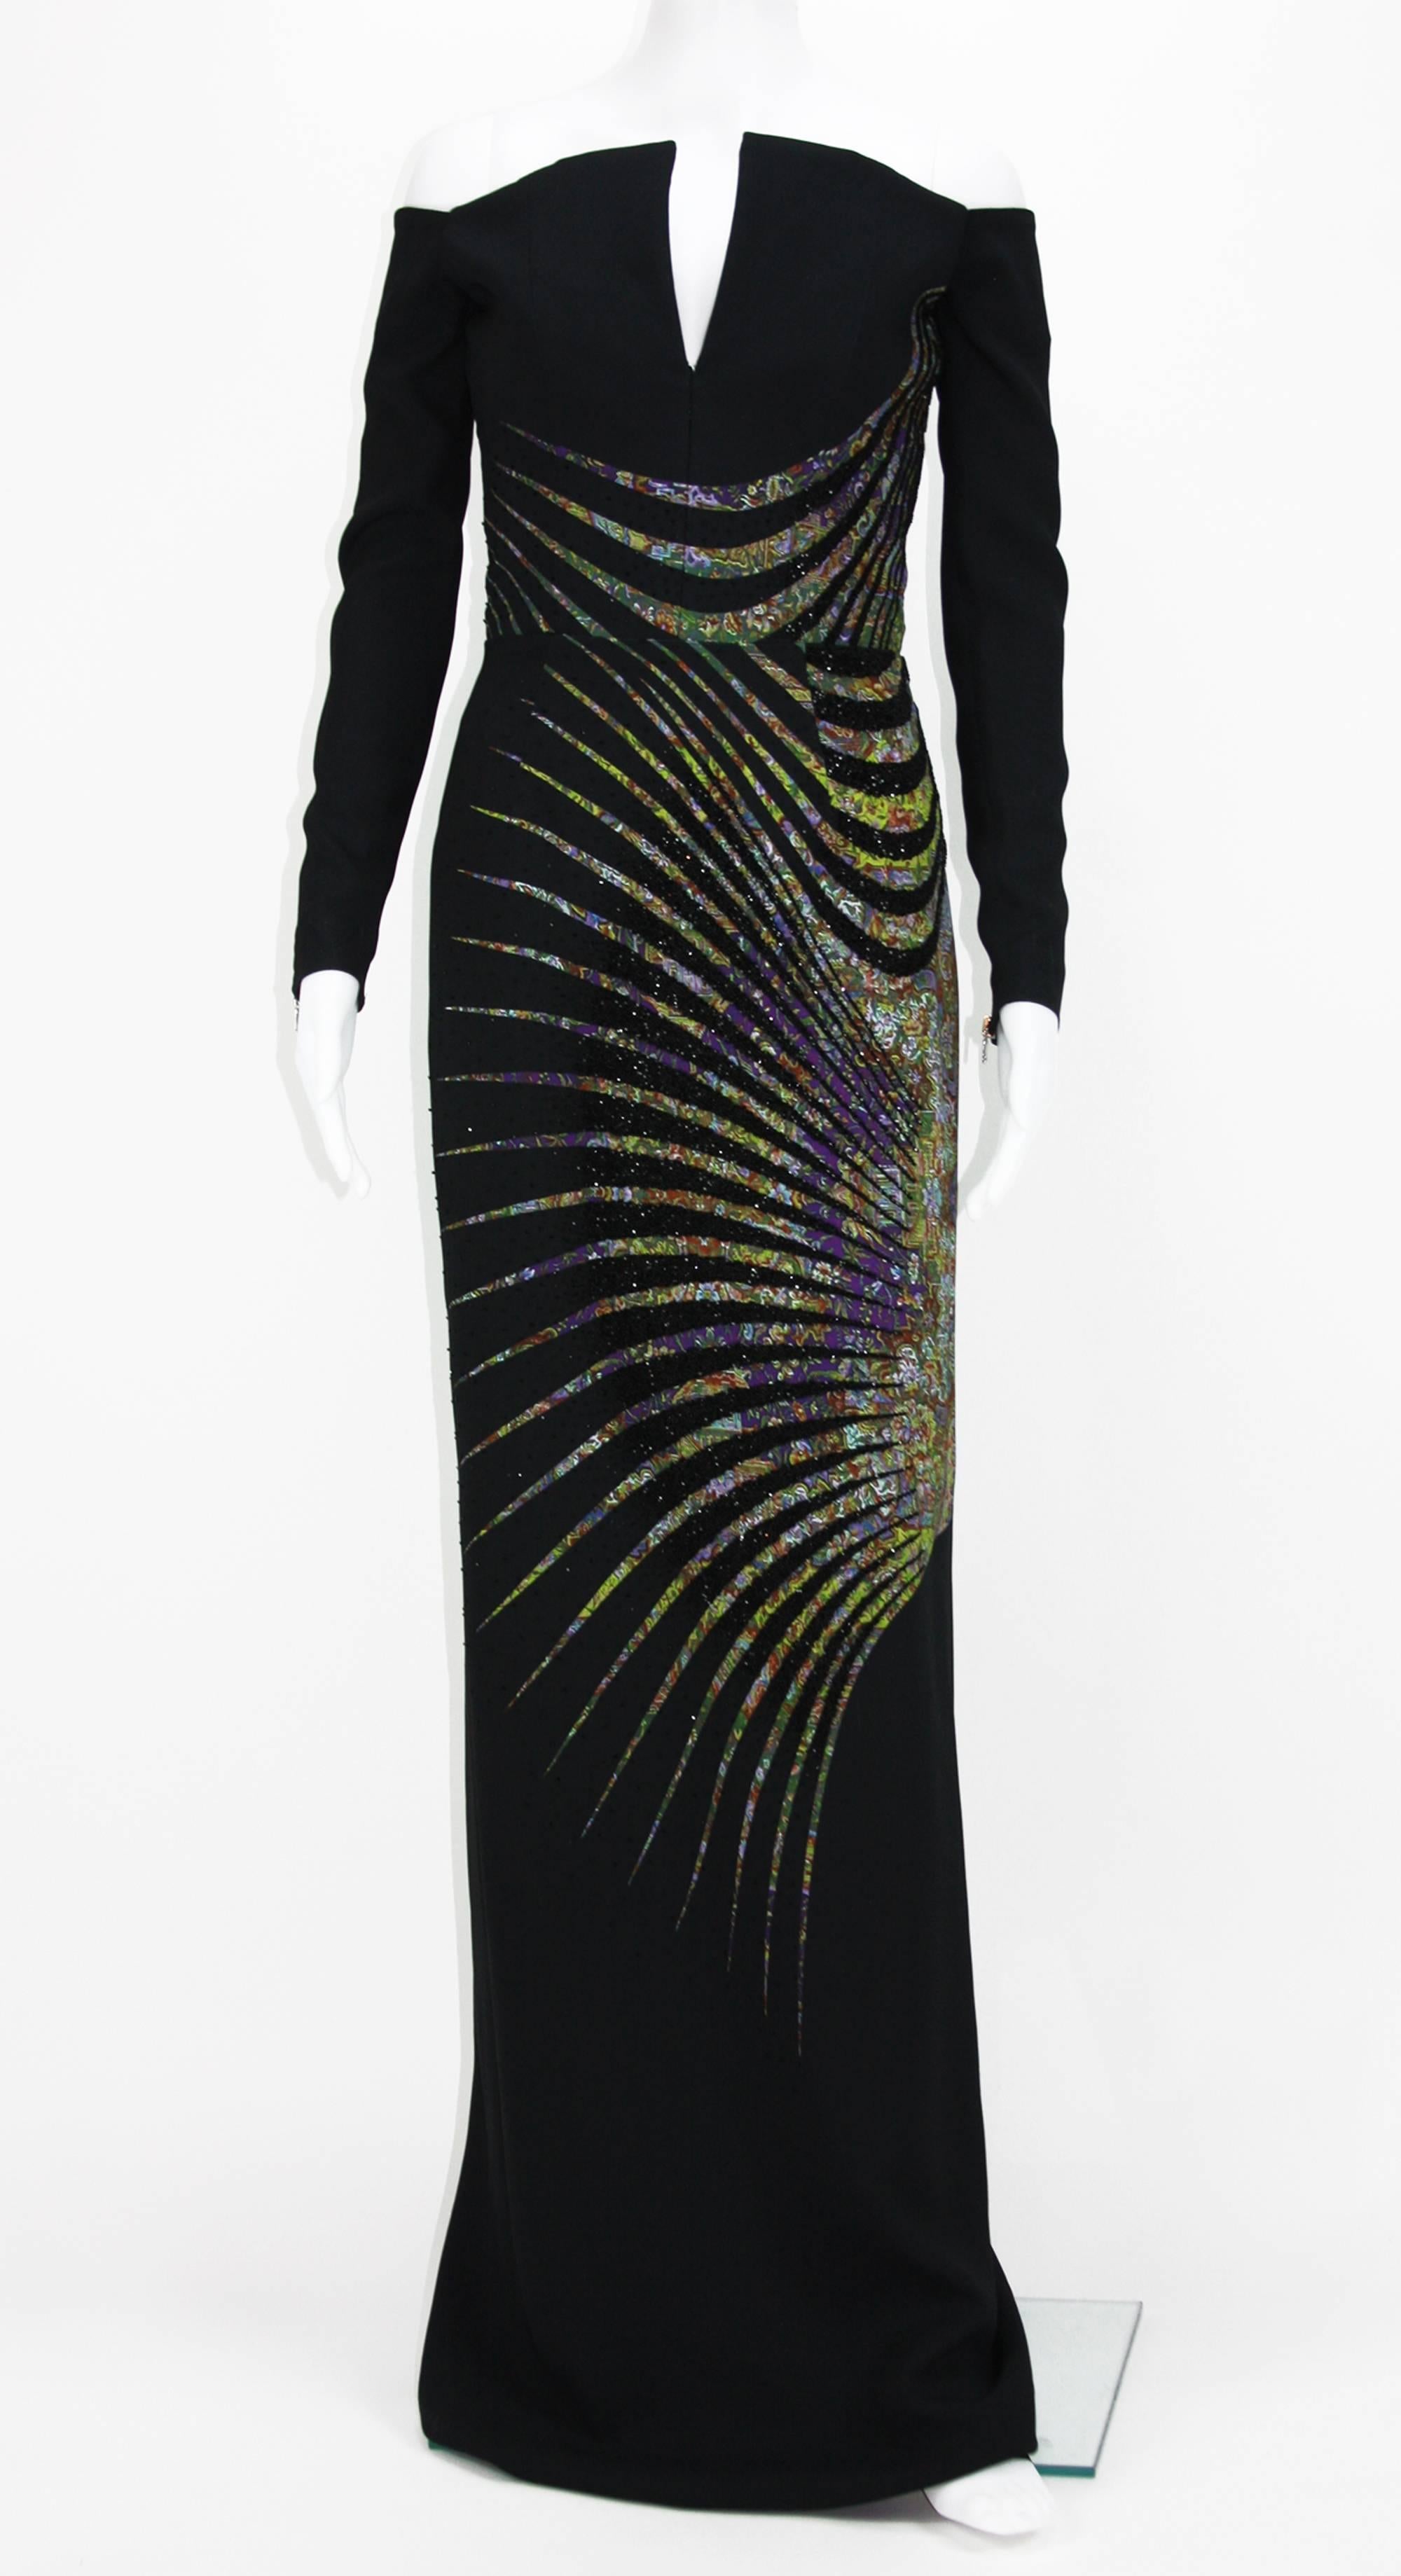 New ETRO Classy Black Micro Beaded Dress Gown
Italian Size 40 – US 4
Color – Black with Multicolored Print
Hand-Work Exclusively Micro Beaded
Zip Closure at Cuffs
Zip Back Closure
Made in ITALY
Retail $6660.00
New with Tag.
Matching Runway Leather